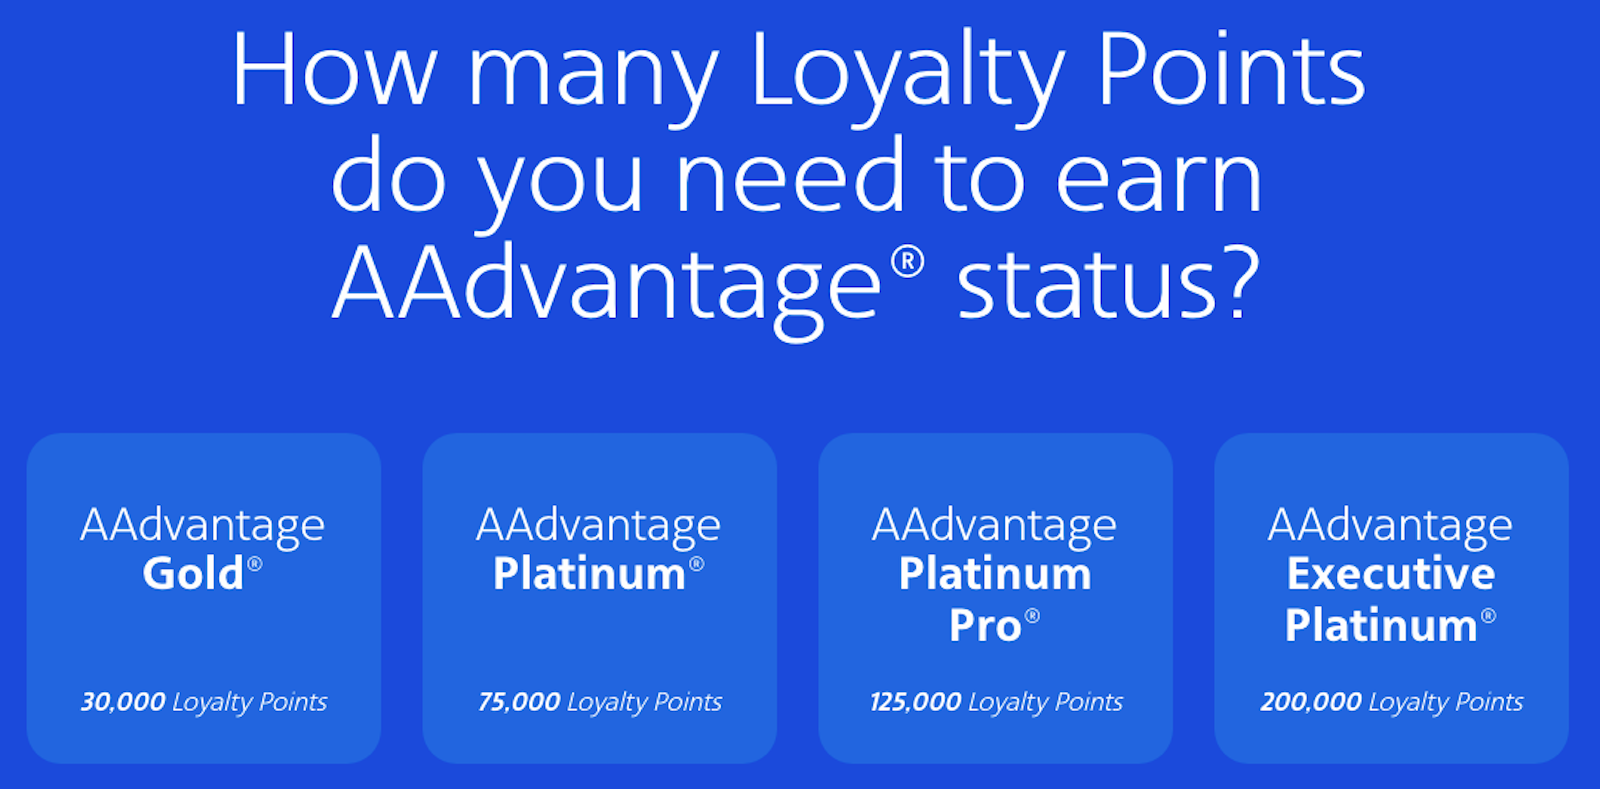 Image from AA.com telling how many Loyalty Points you need for elite status levels in the new program